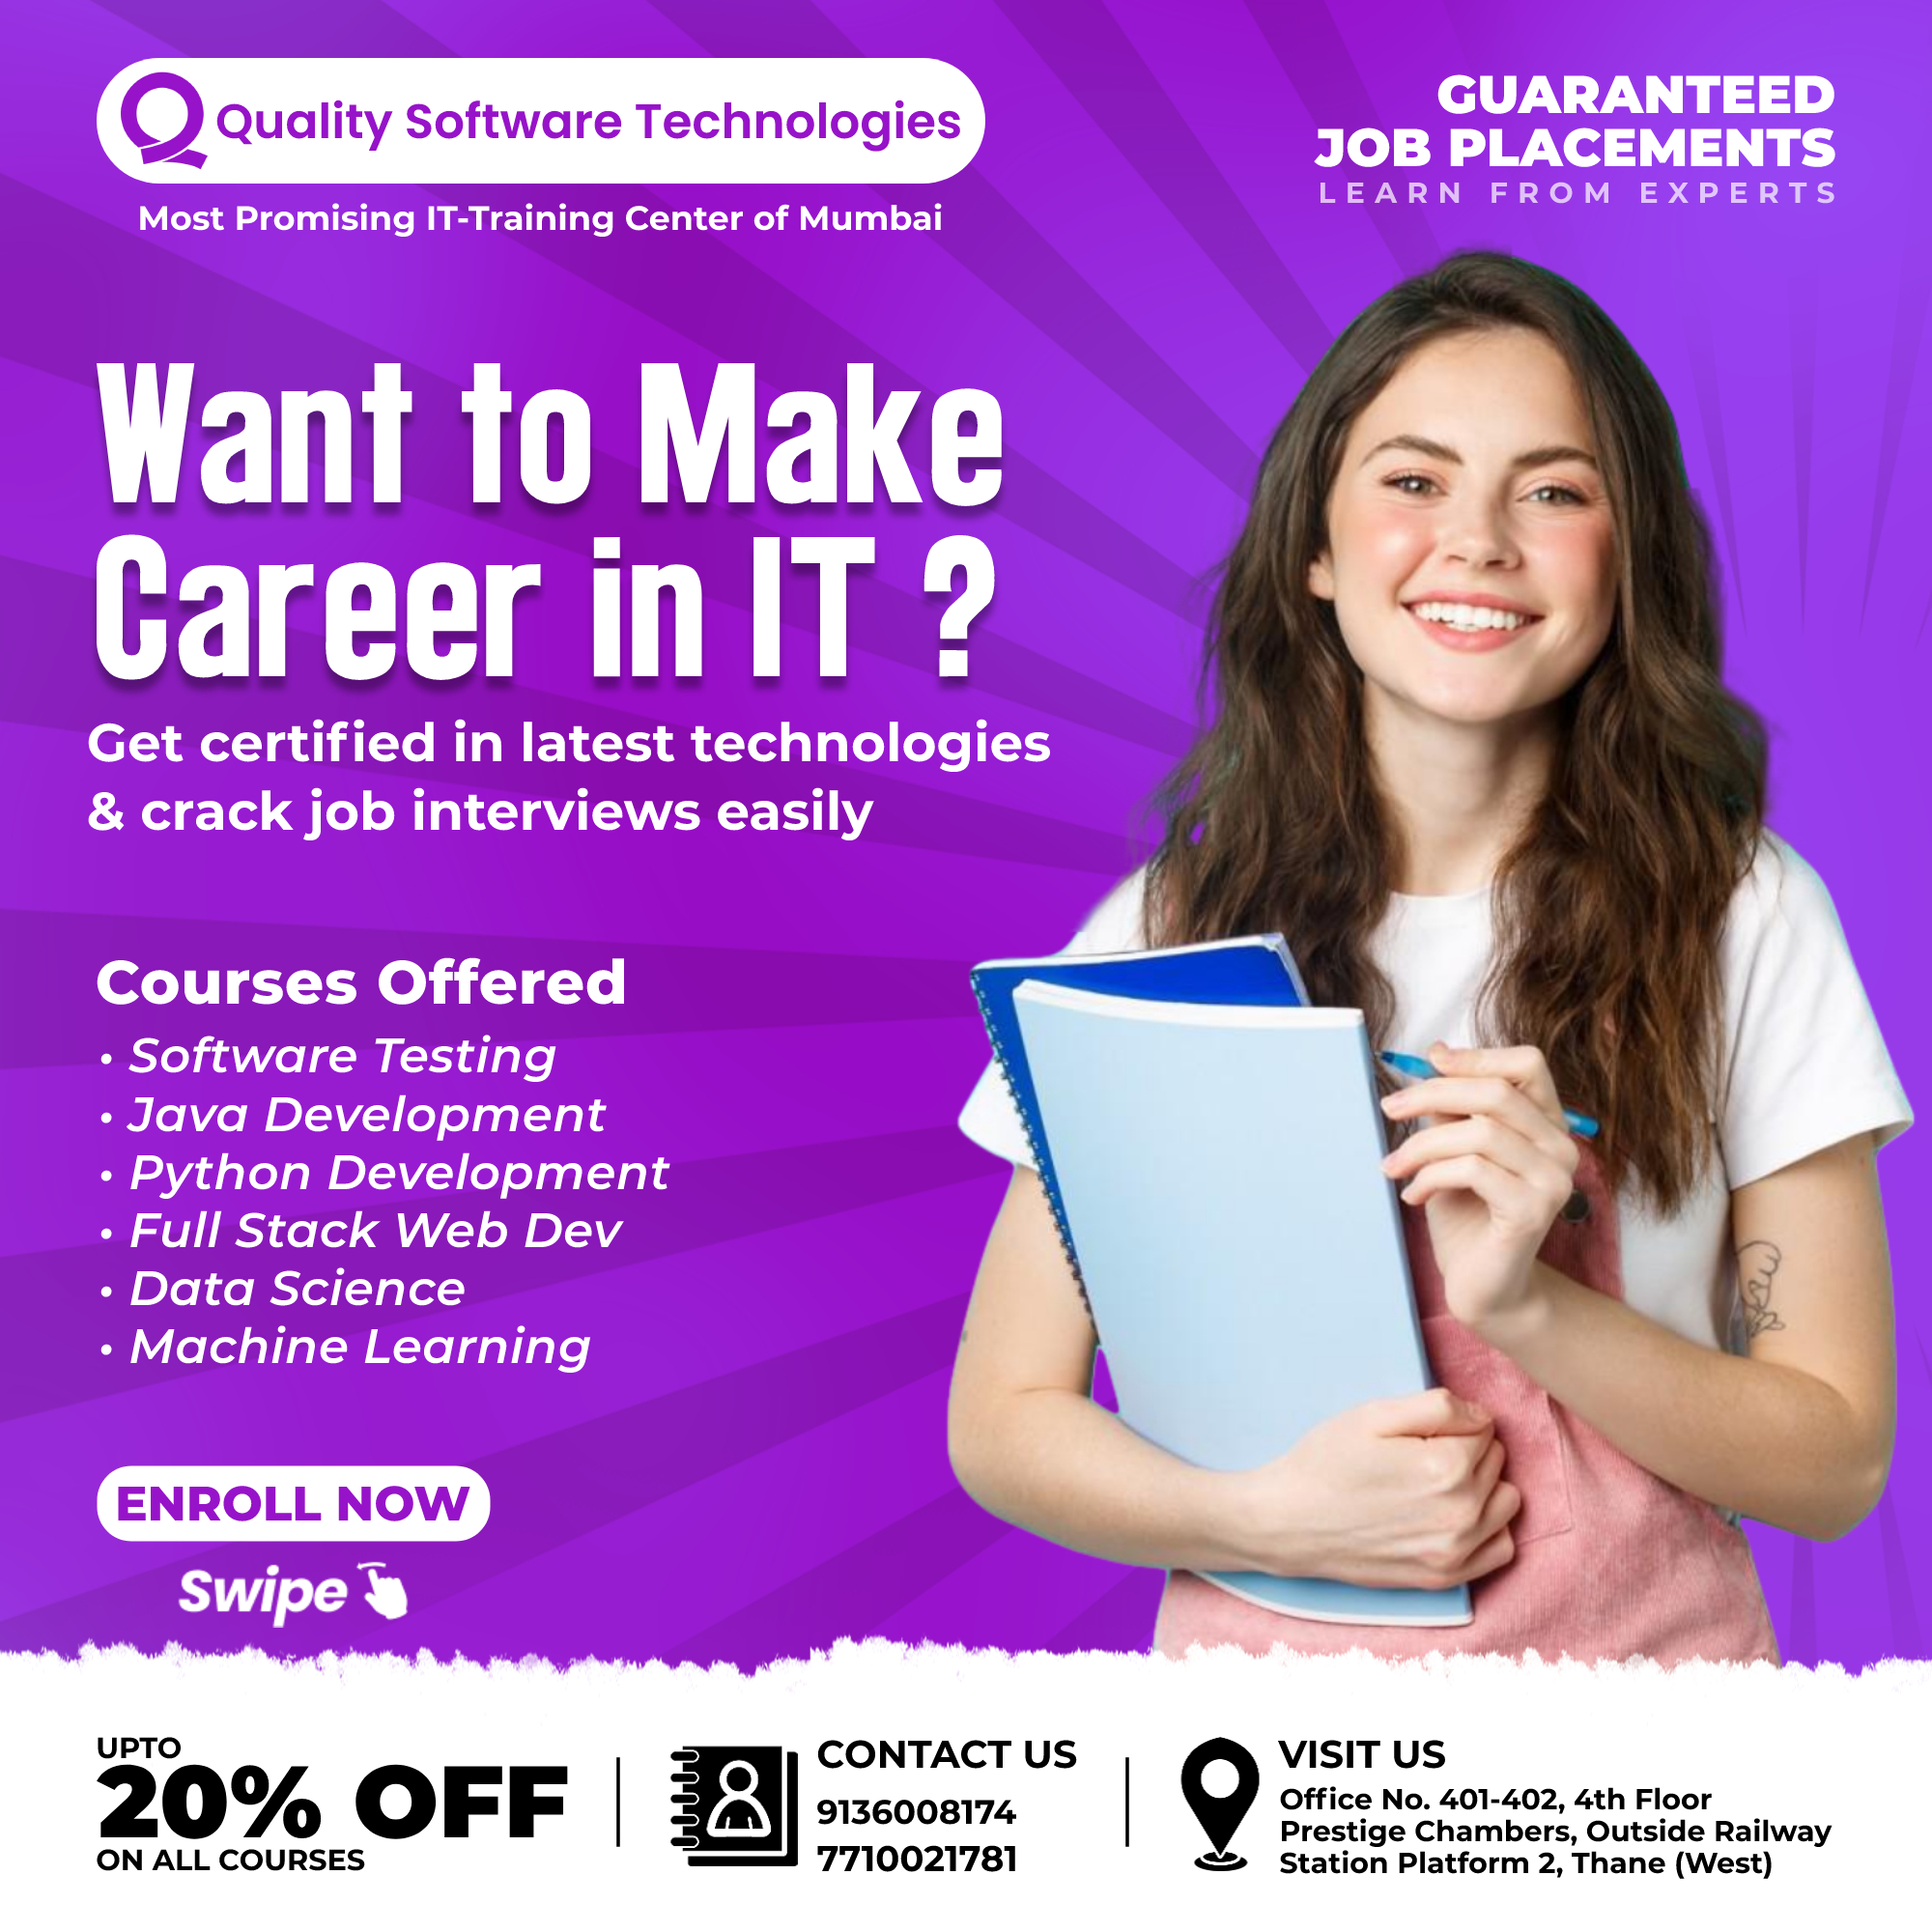 Java Programming Institute with 100% Job Placement